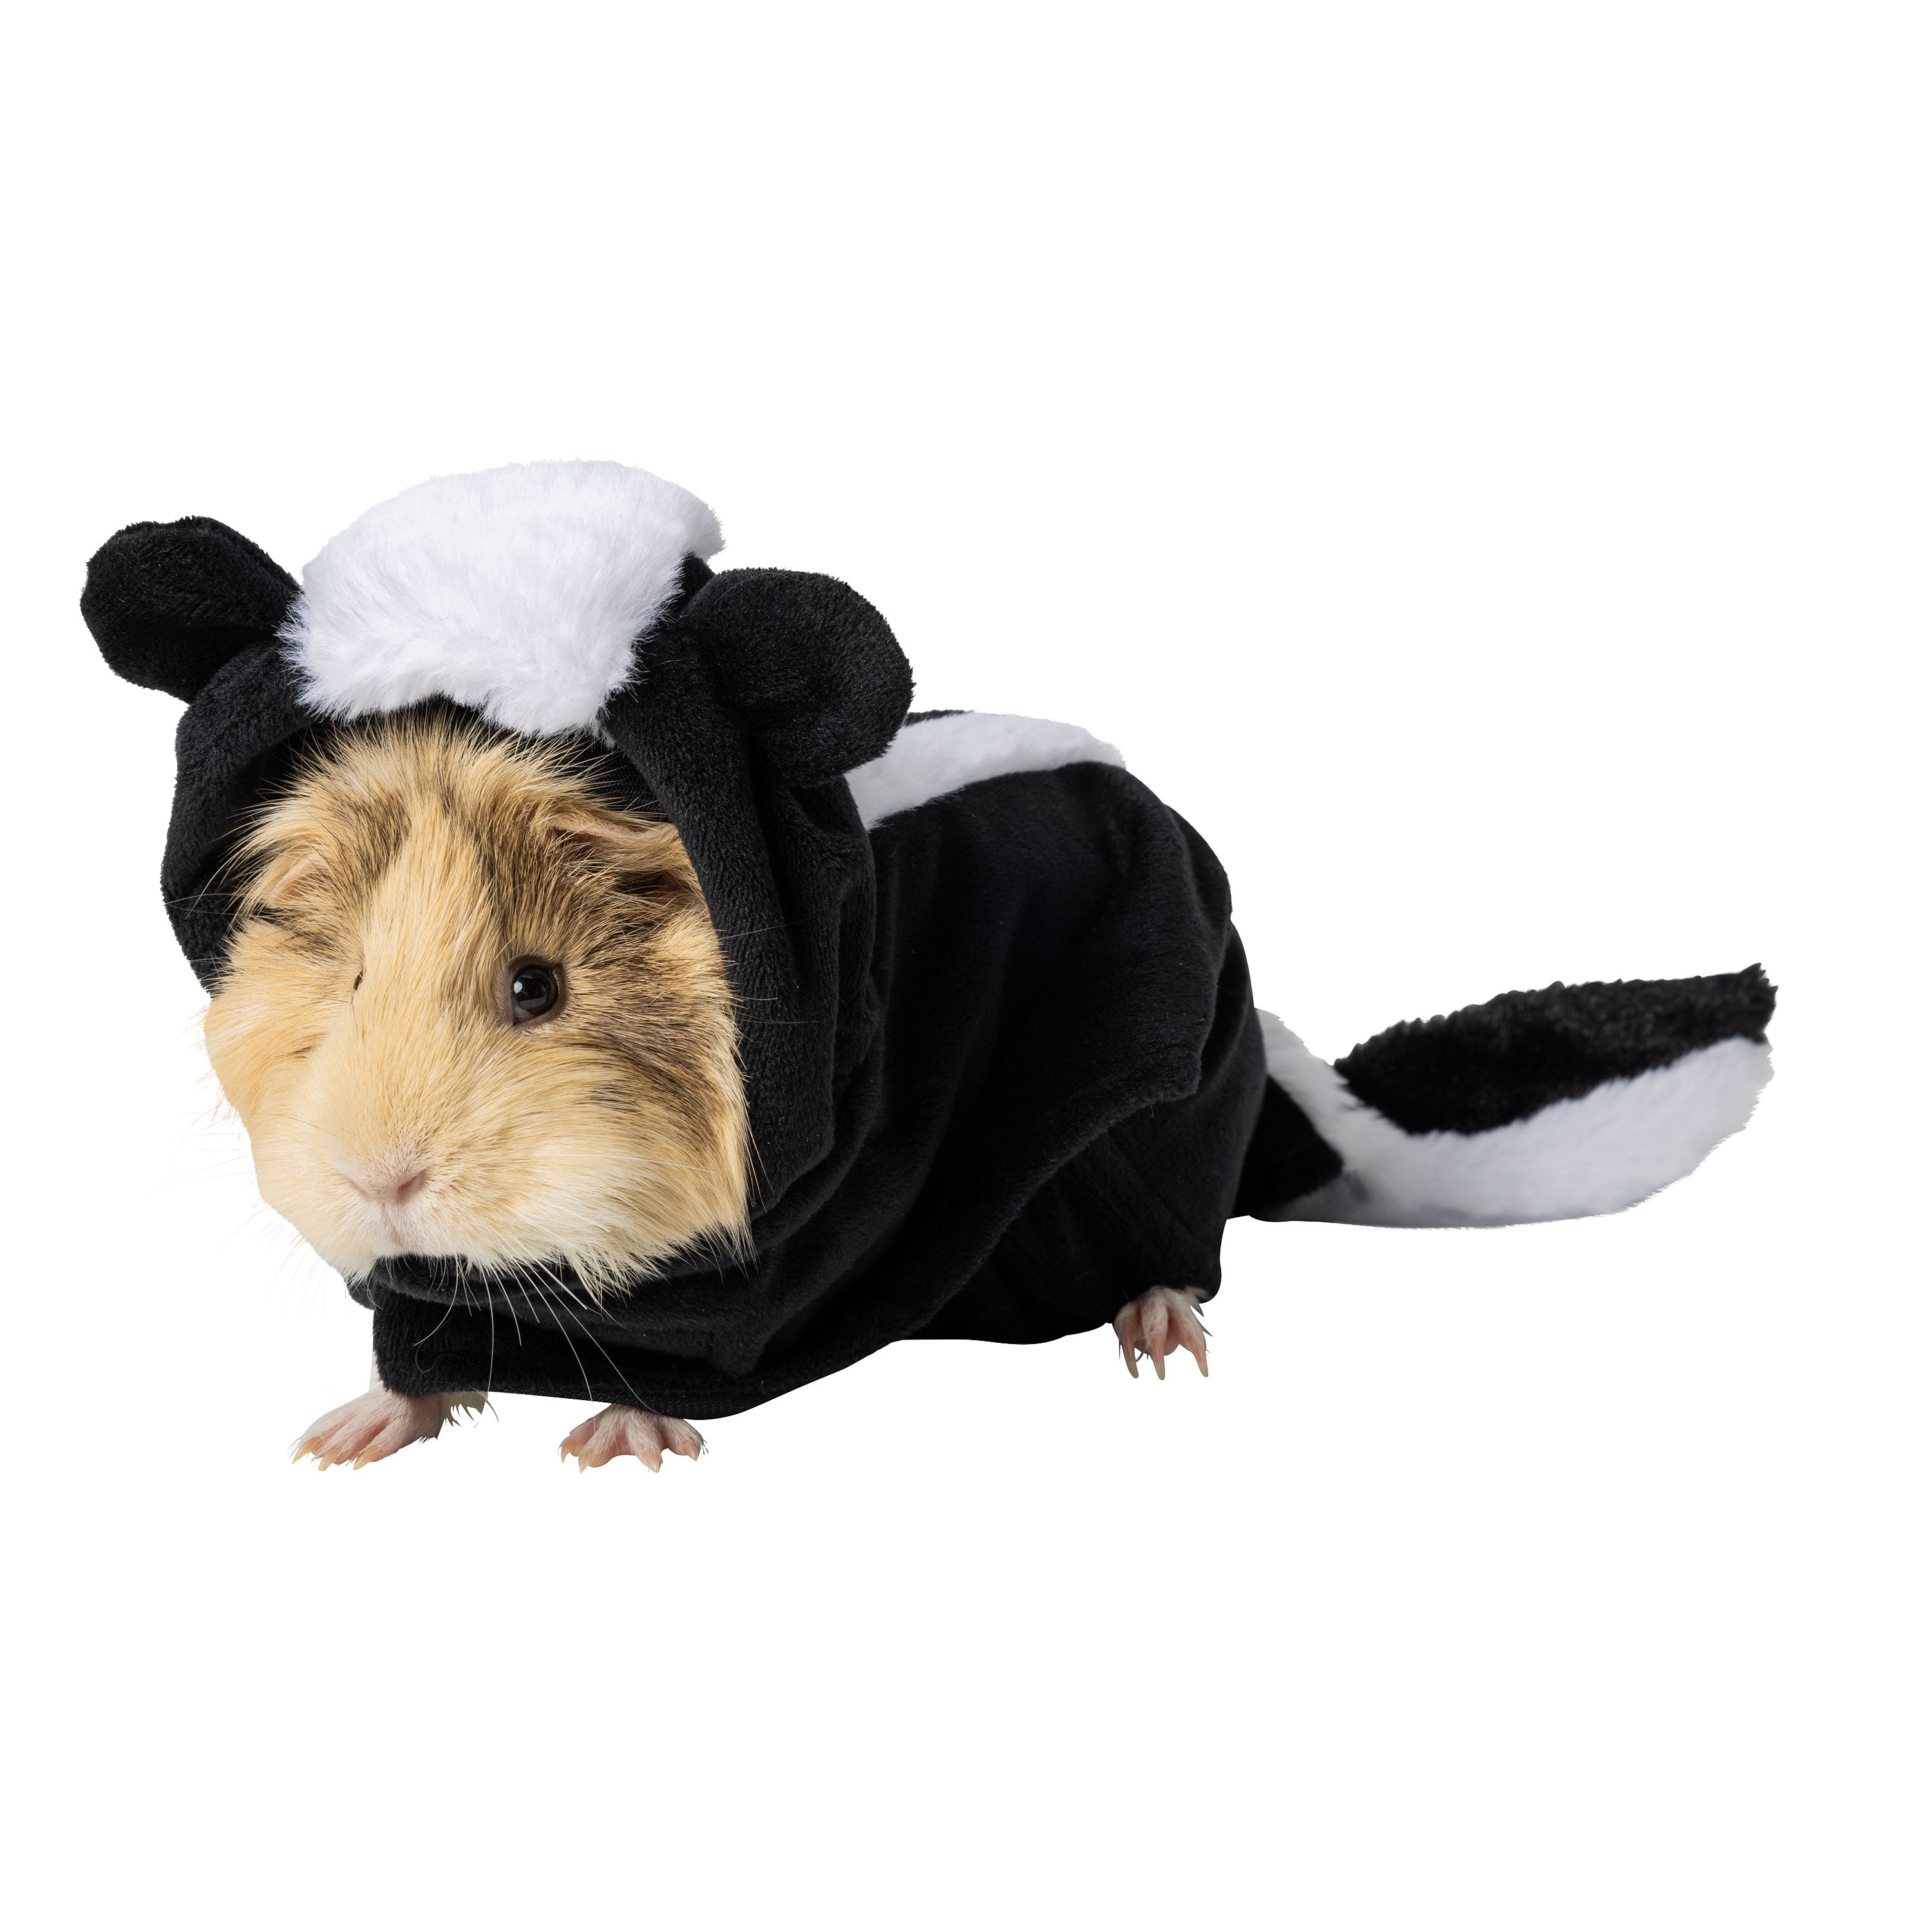 PetSmart has Halloween costumes for guinea pigs and they're the